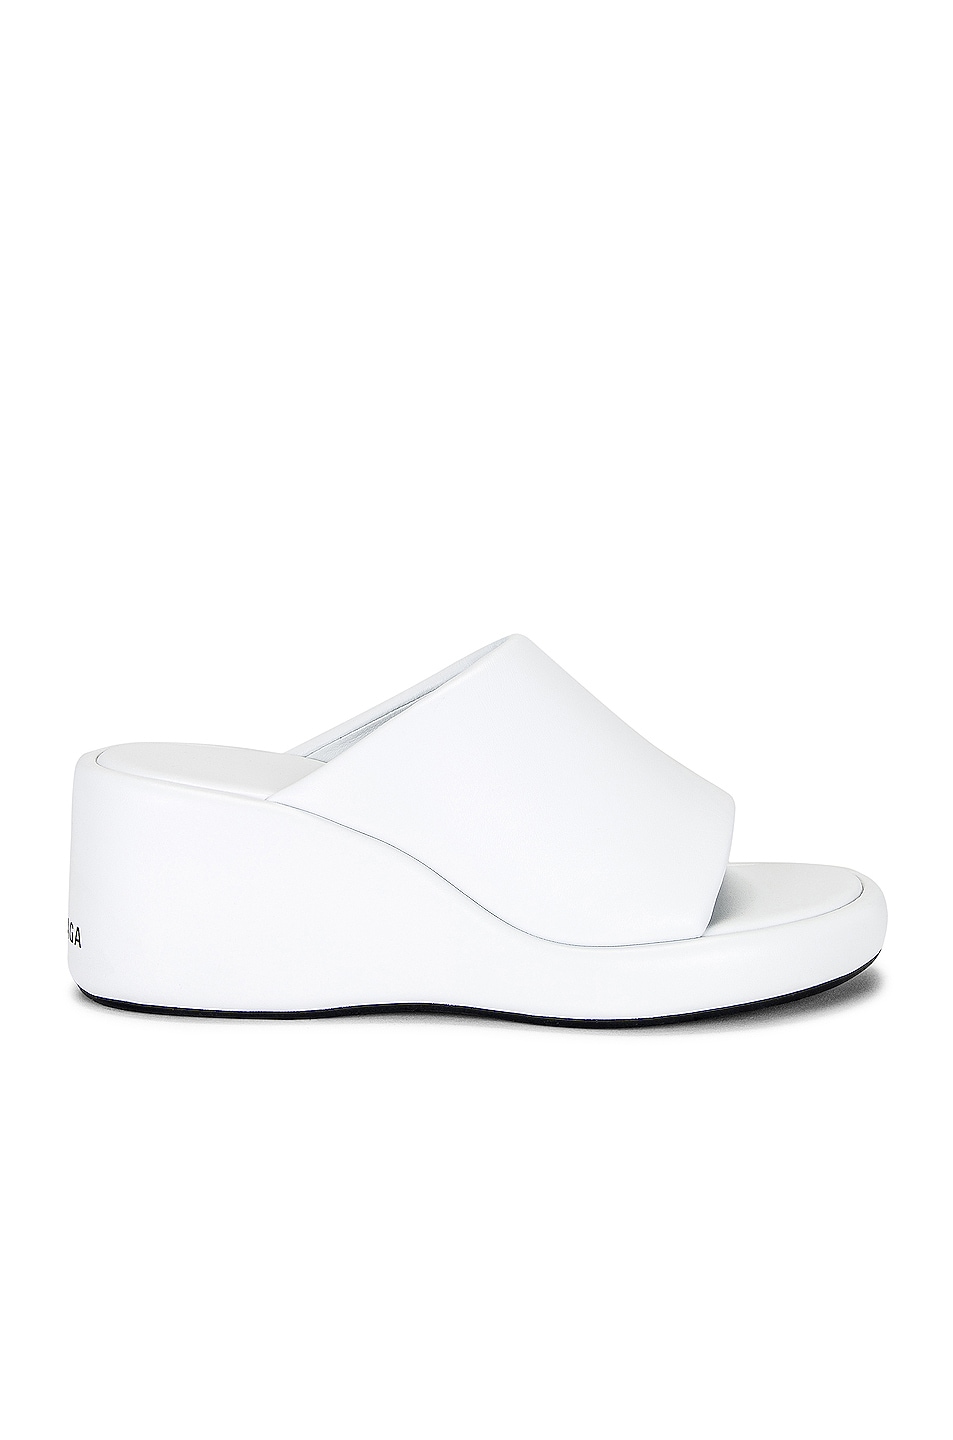 Image 1 of Balenciaga Rise Wedge Sandals in White & Black